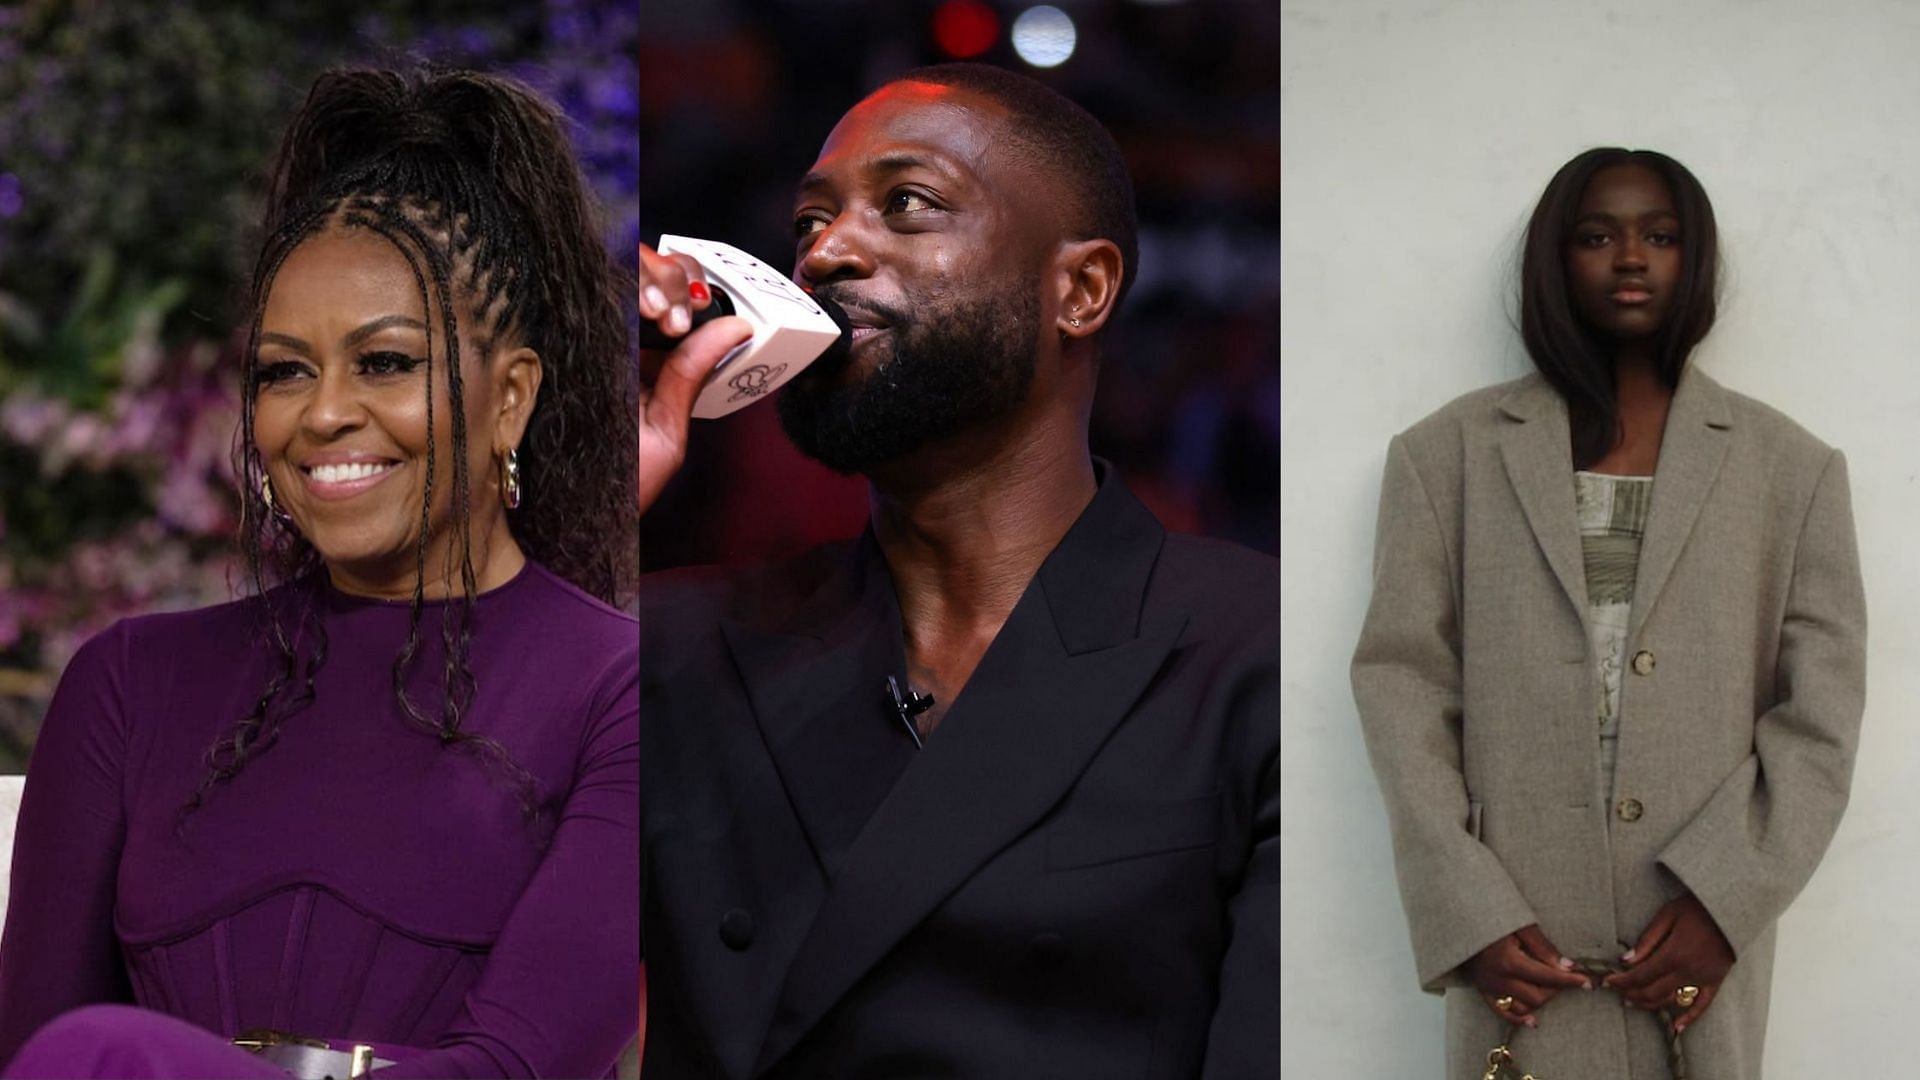 Fans react to interview between Michelle Obama and Dwyane Wade